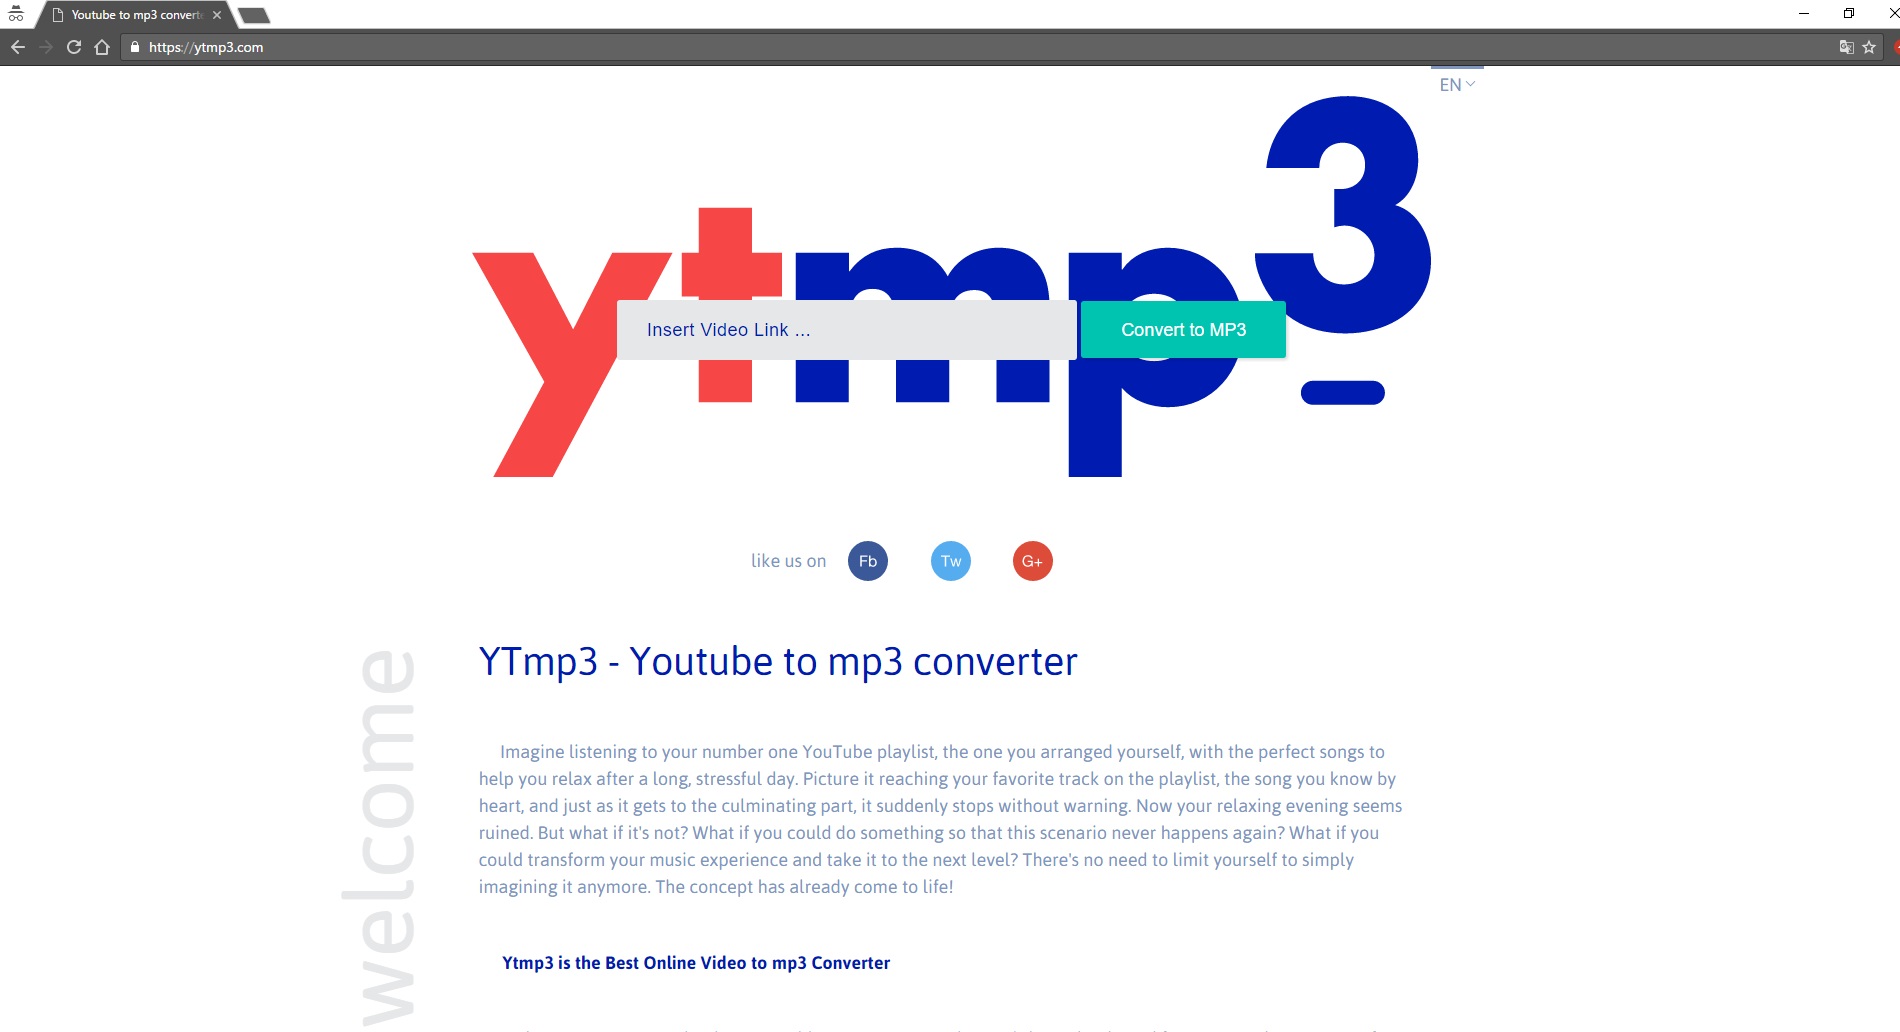 YTmp3 - helping for converting YouTube videos to mp3 files